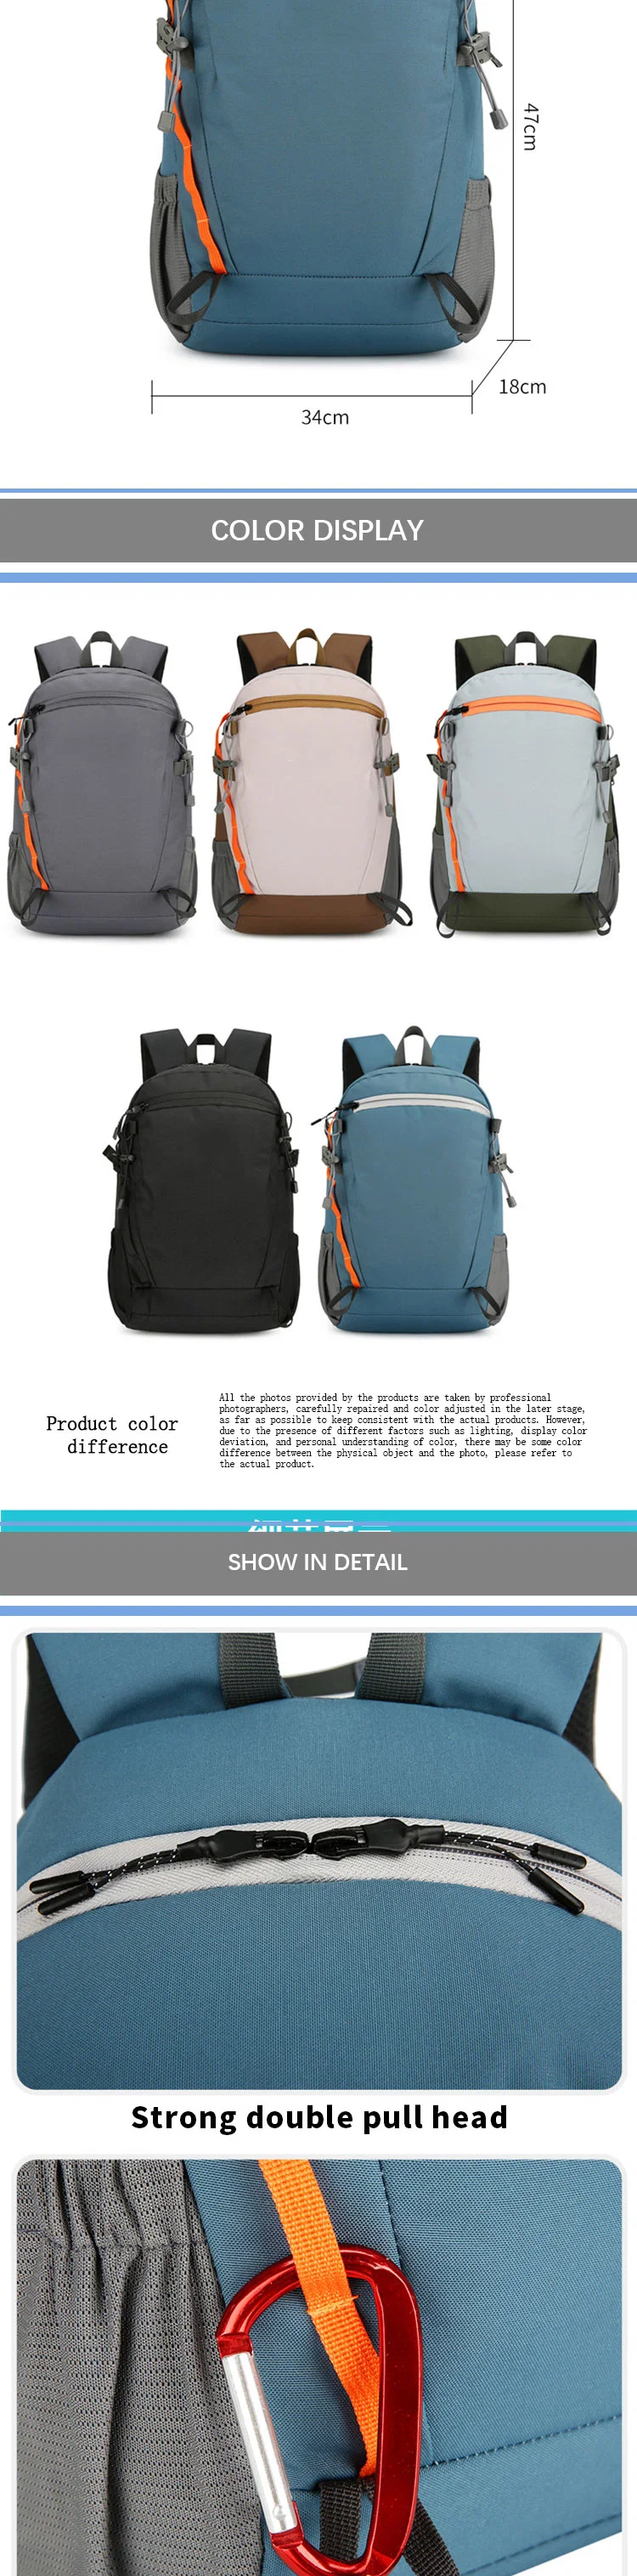 Outdoor Sports Spring Summer Hiking Daily Leisure Backpack Travel Bags